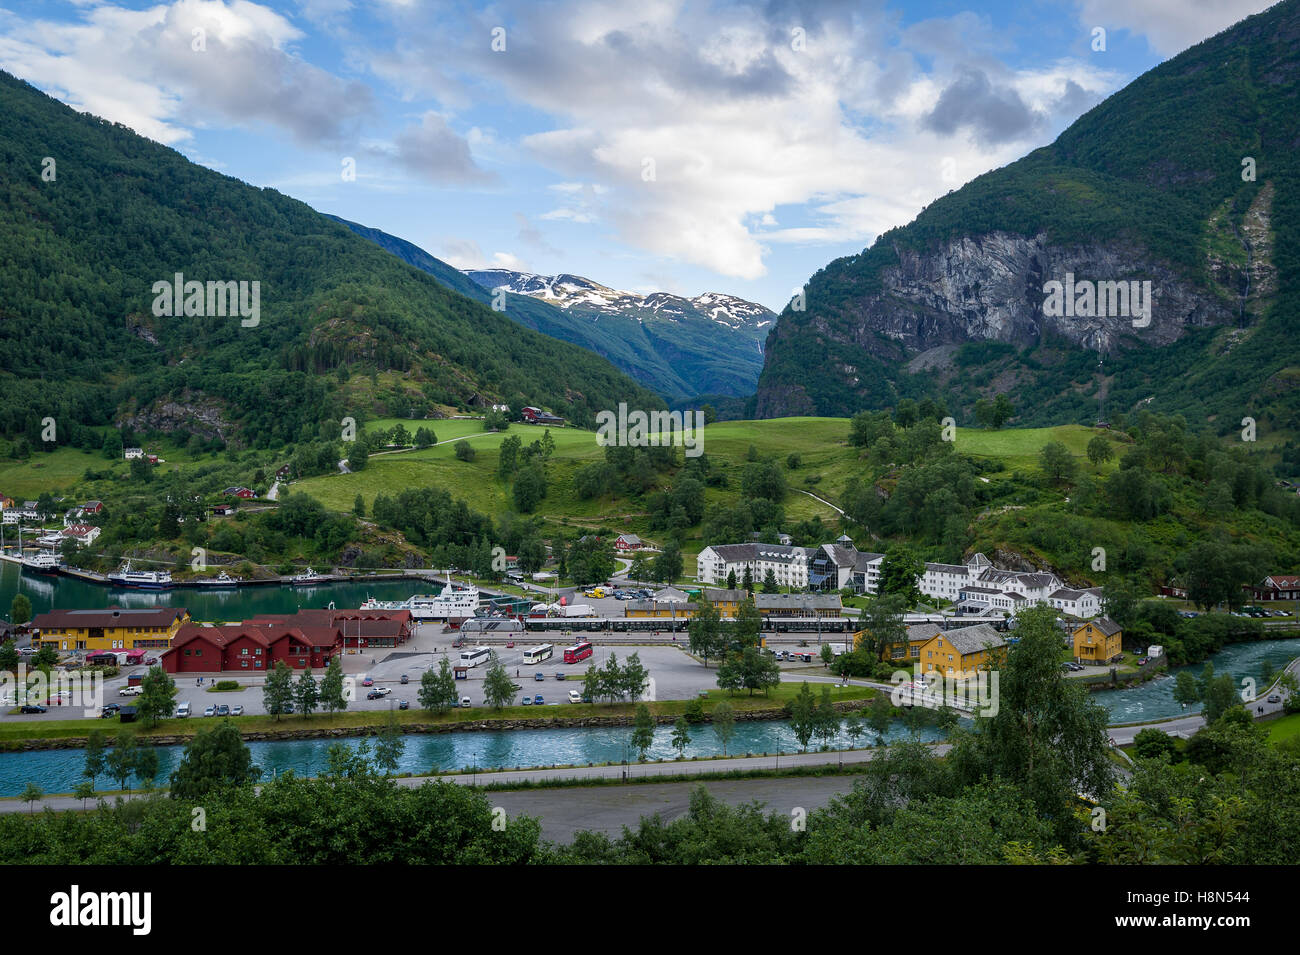 Flam town and famous mountain railway Stock Photo